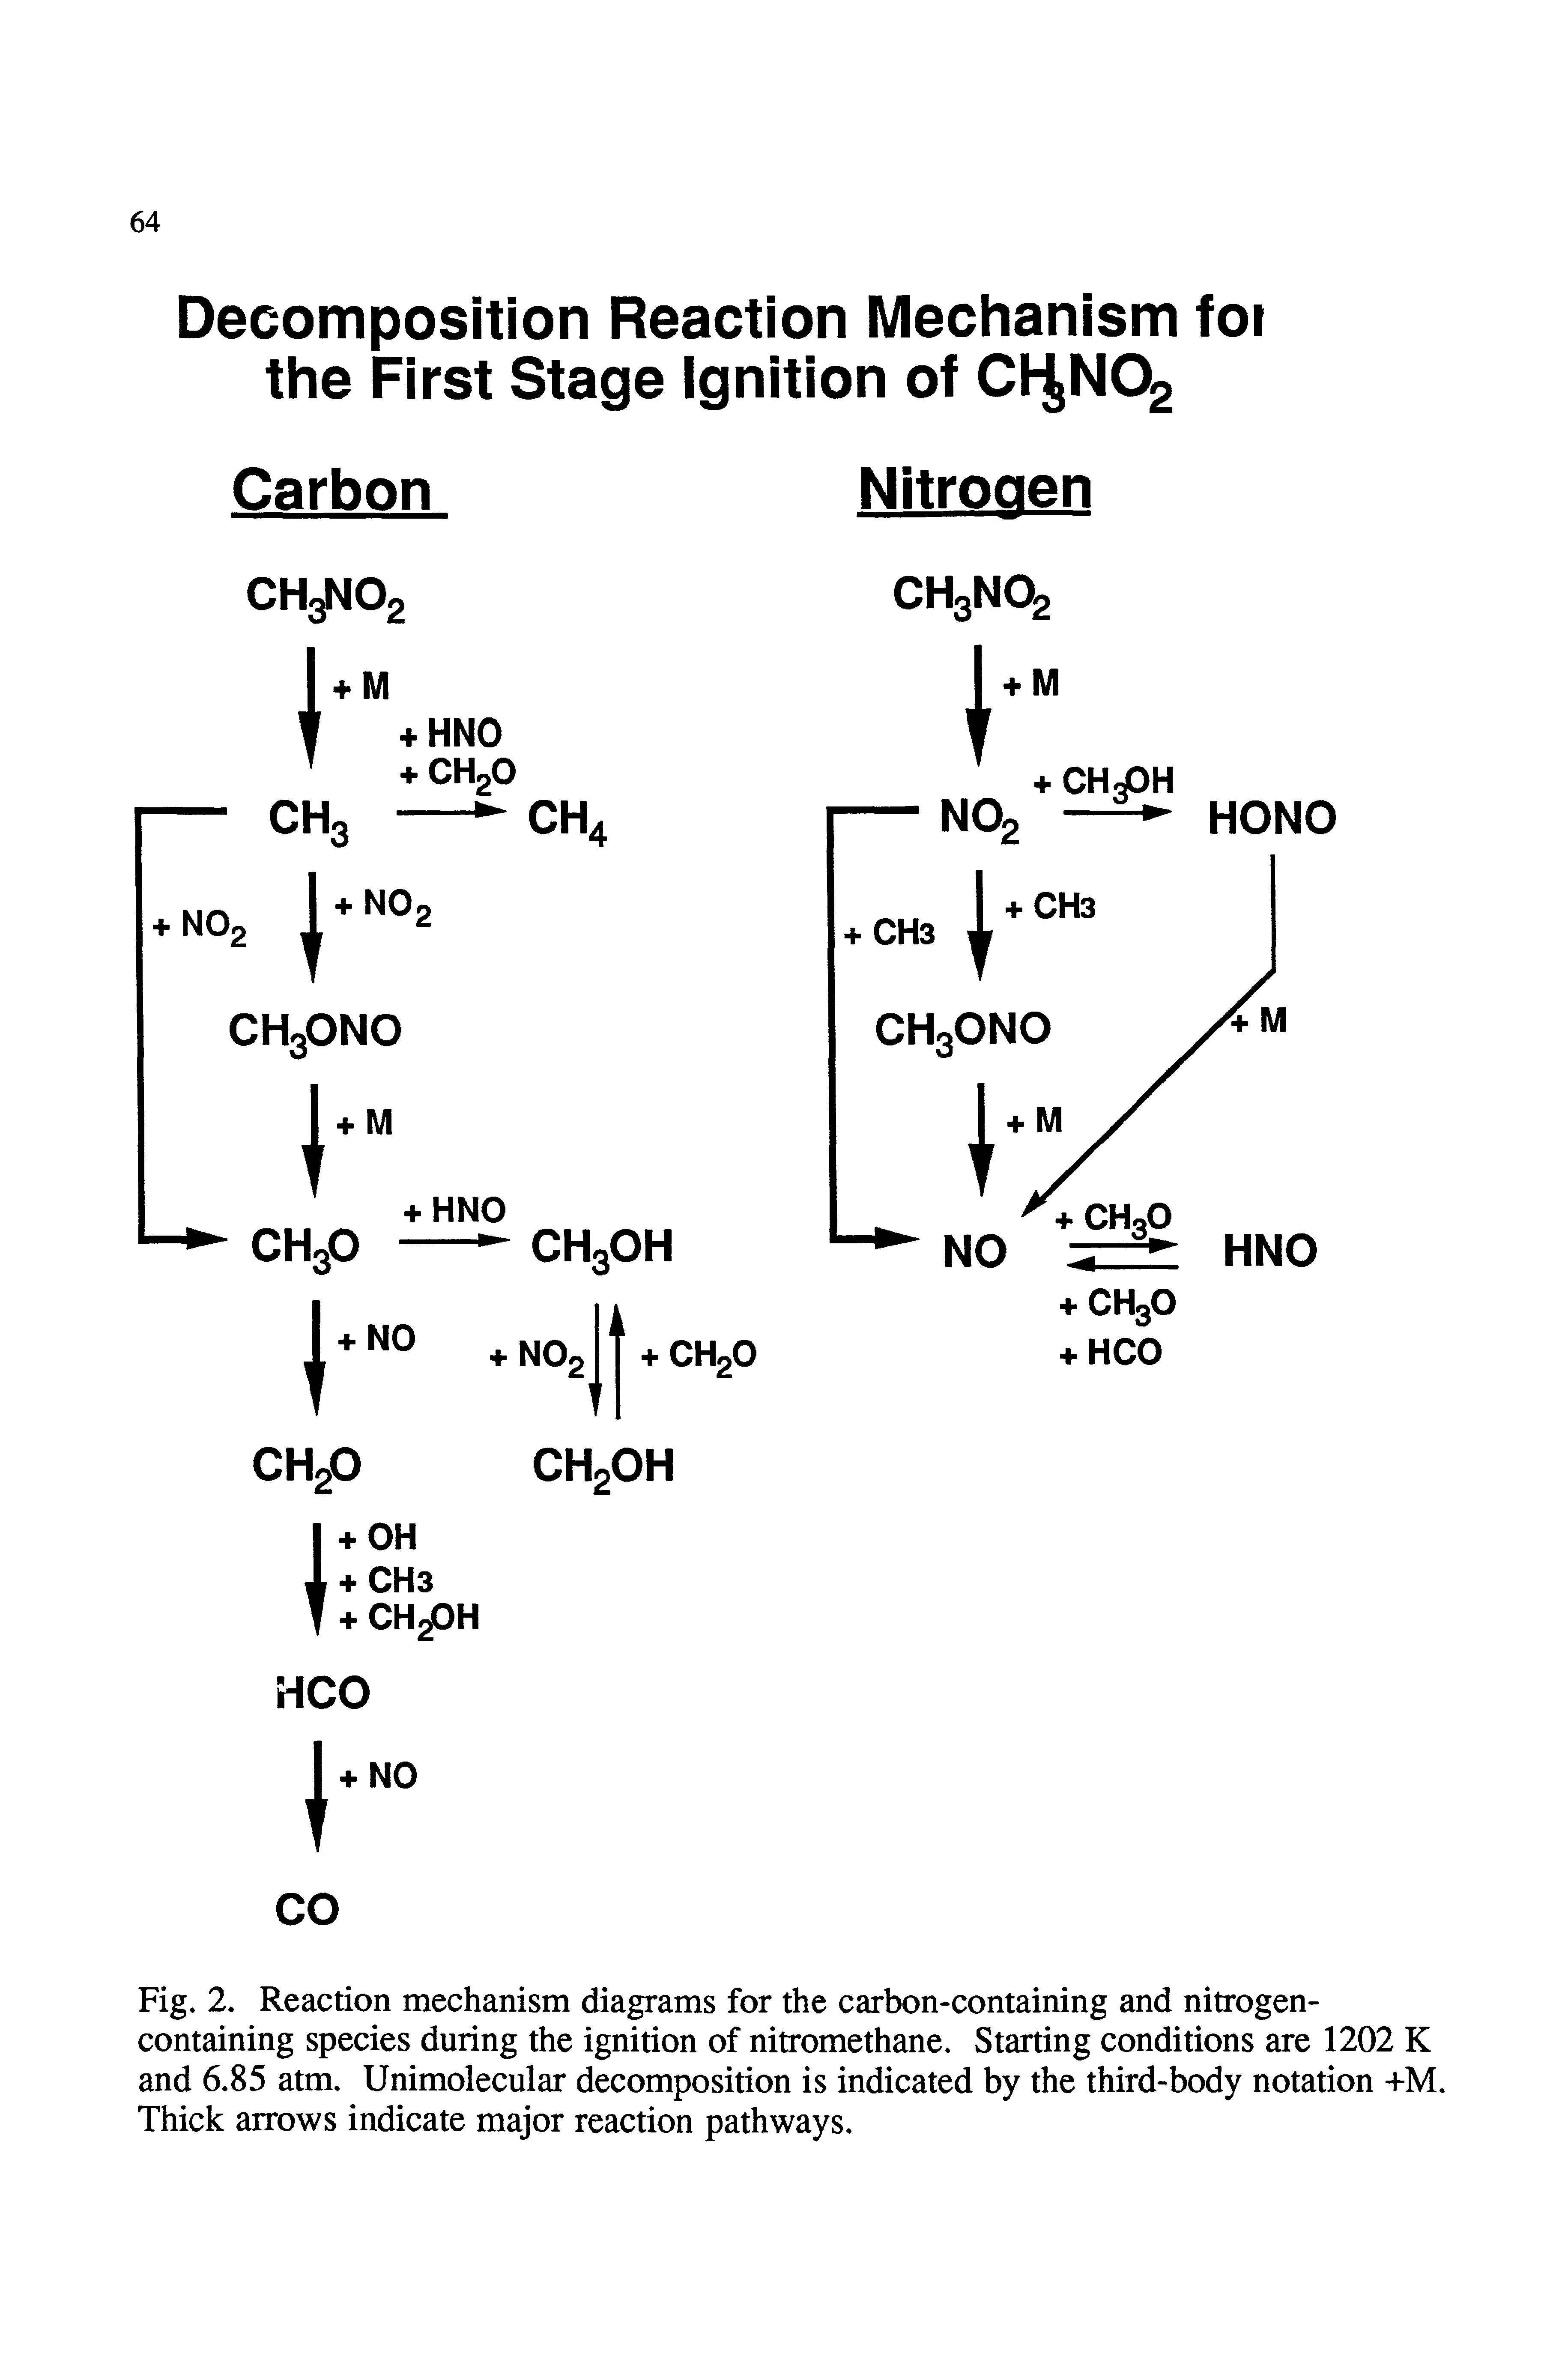 Fig. 2. Reaction mechanism diagrams for the carbon-containing and nitrogen-containing species during the ignition of nitromethane. Starting conditions are 1202 K and 6.85 atm. Unimolecular decomposition is indicated by the third-body notation +M. Thick arrows indicate major reaction pathways.